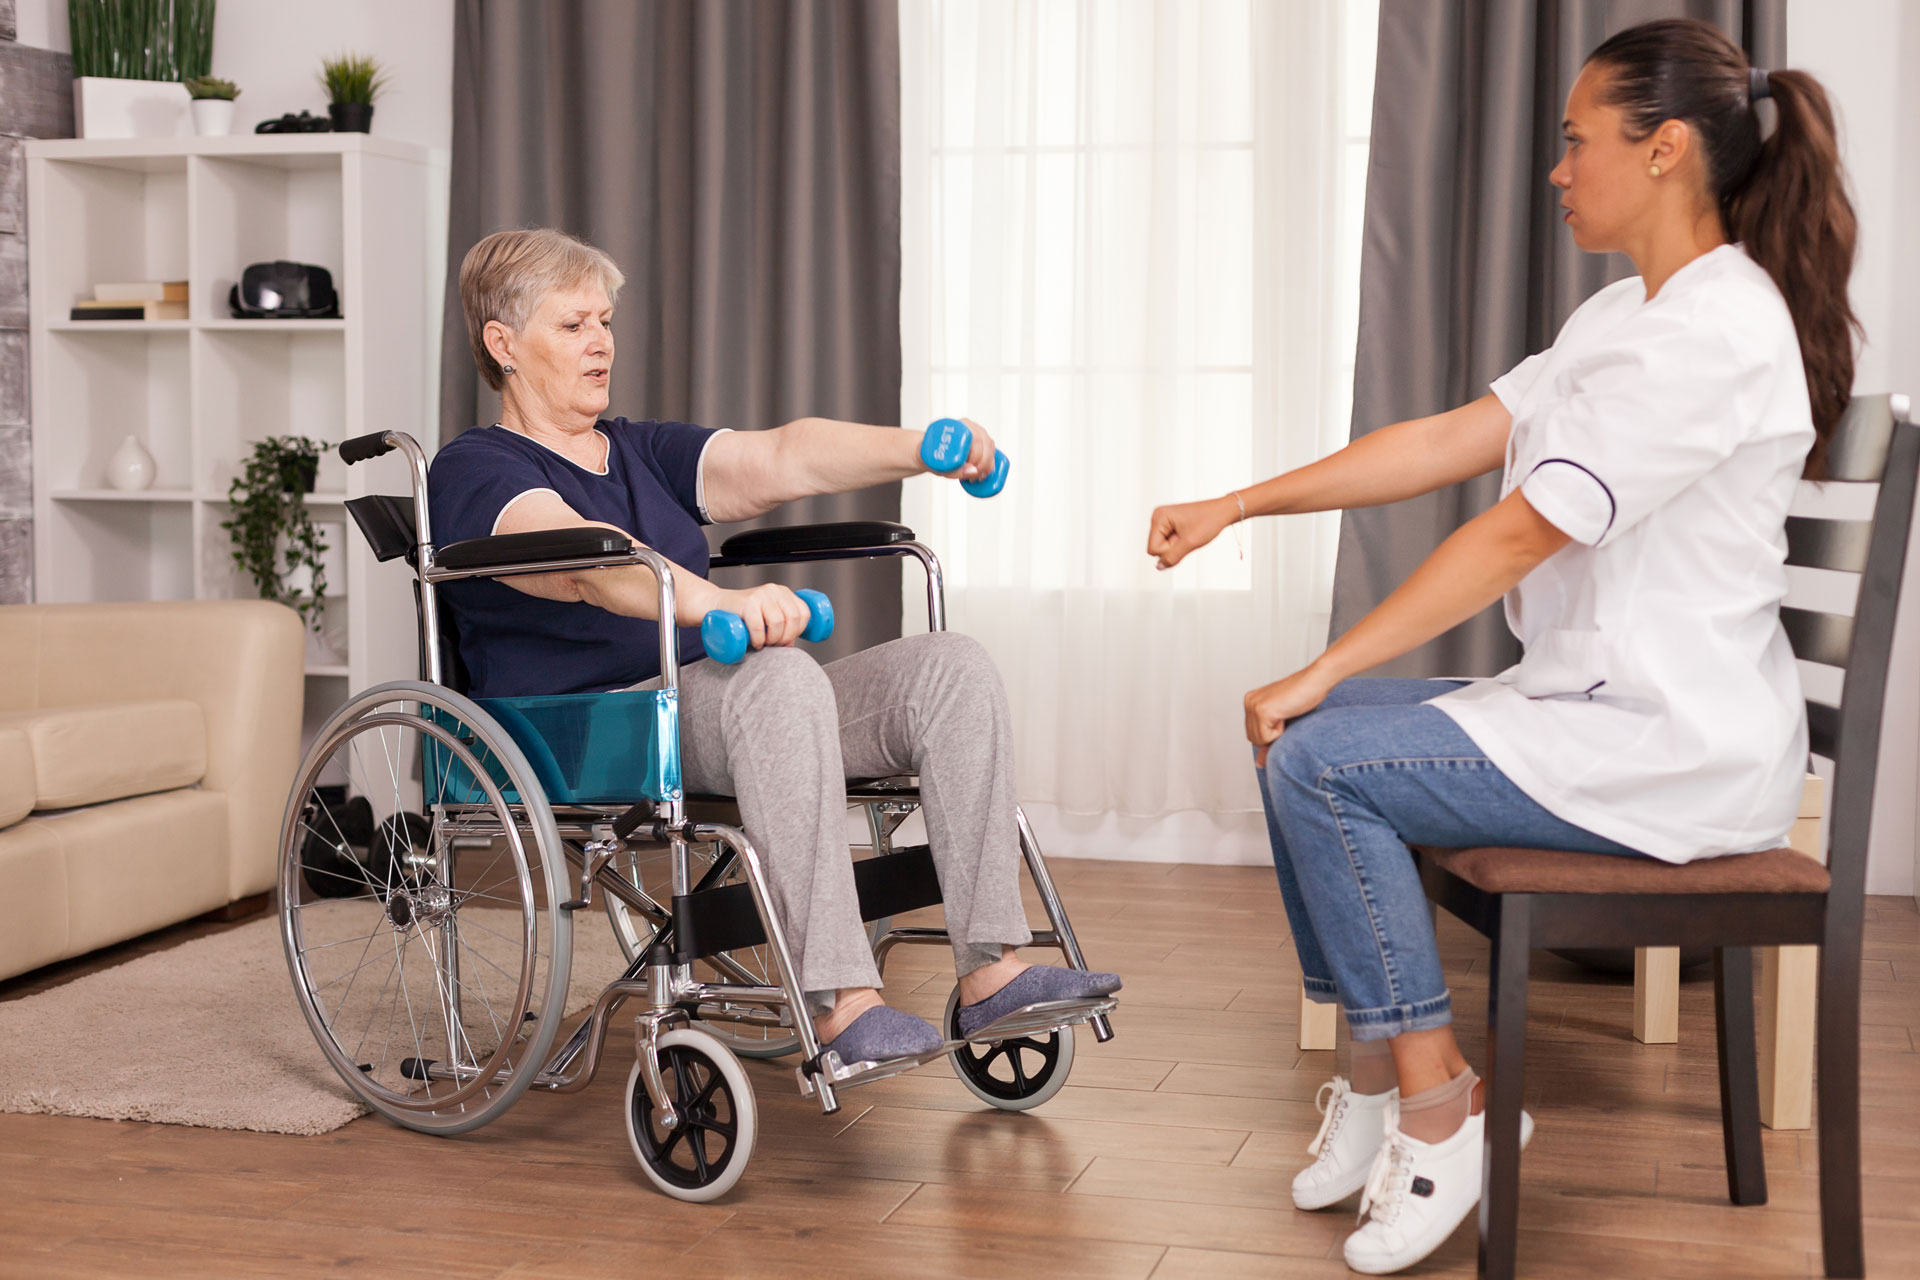 physical therapist helping senior woman in wheelchair lift weights